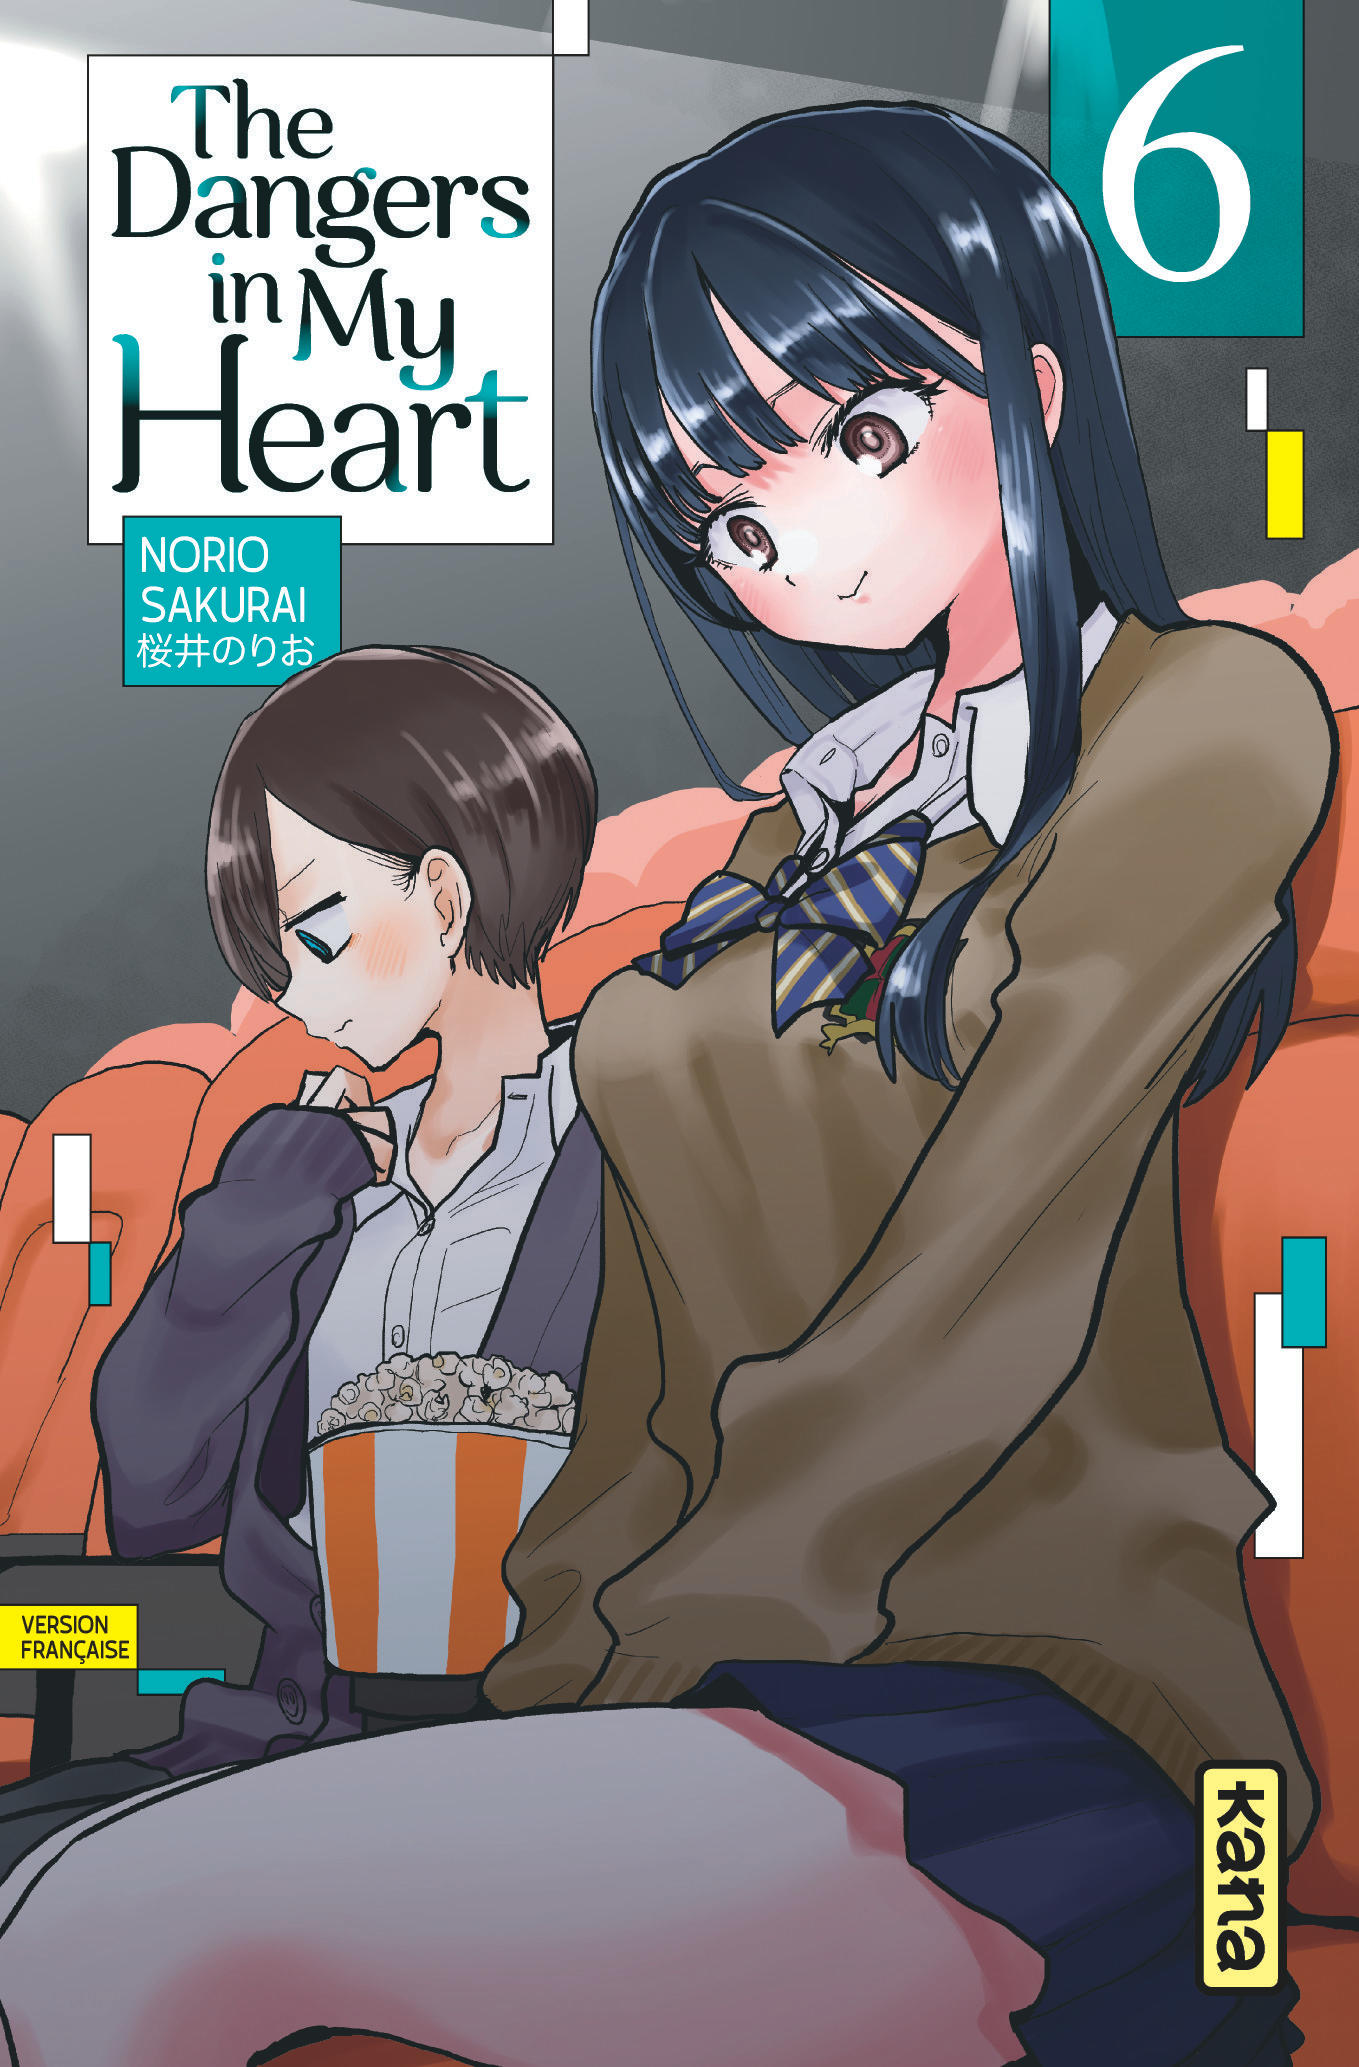 The Dangers in my heart – Tome 6 - couv